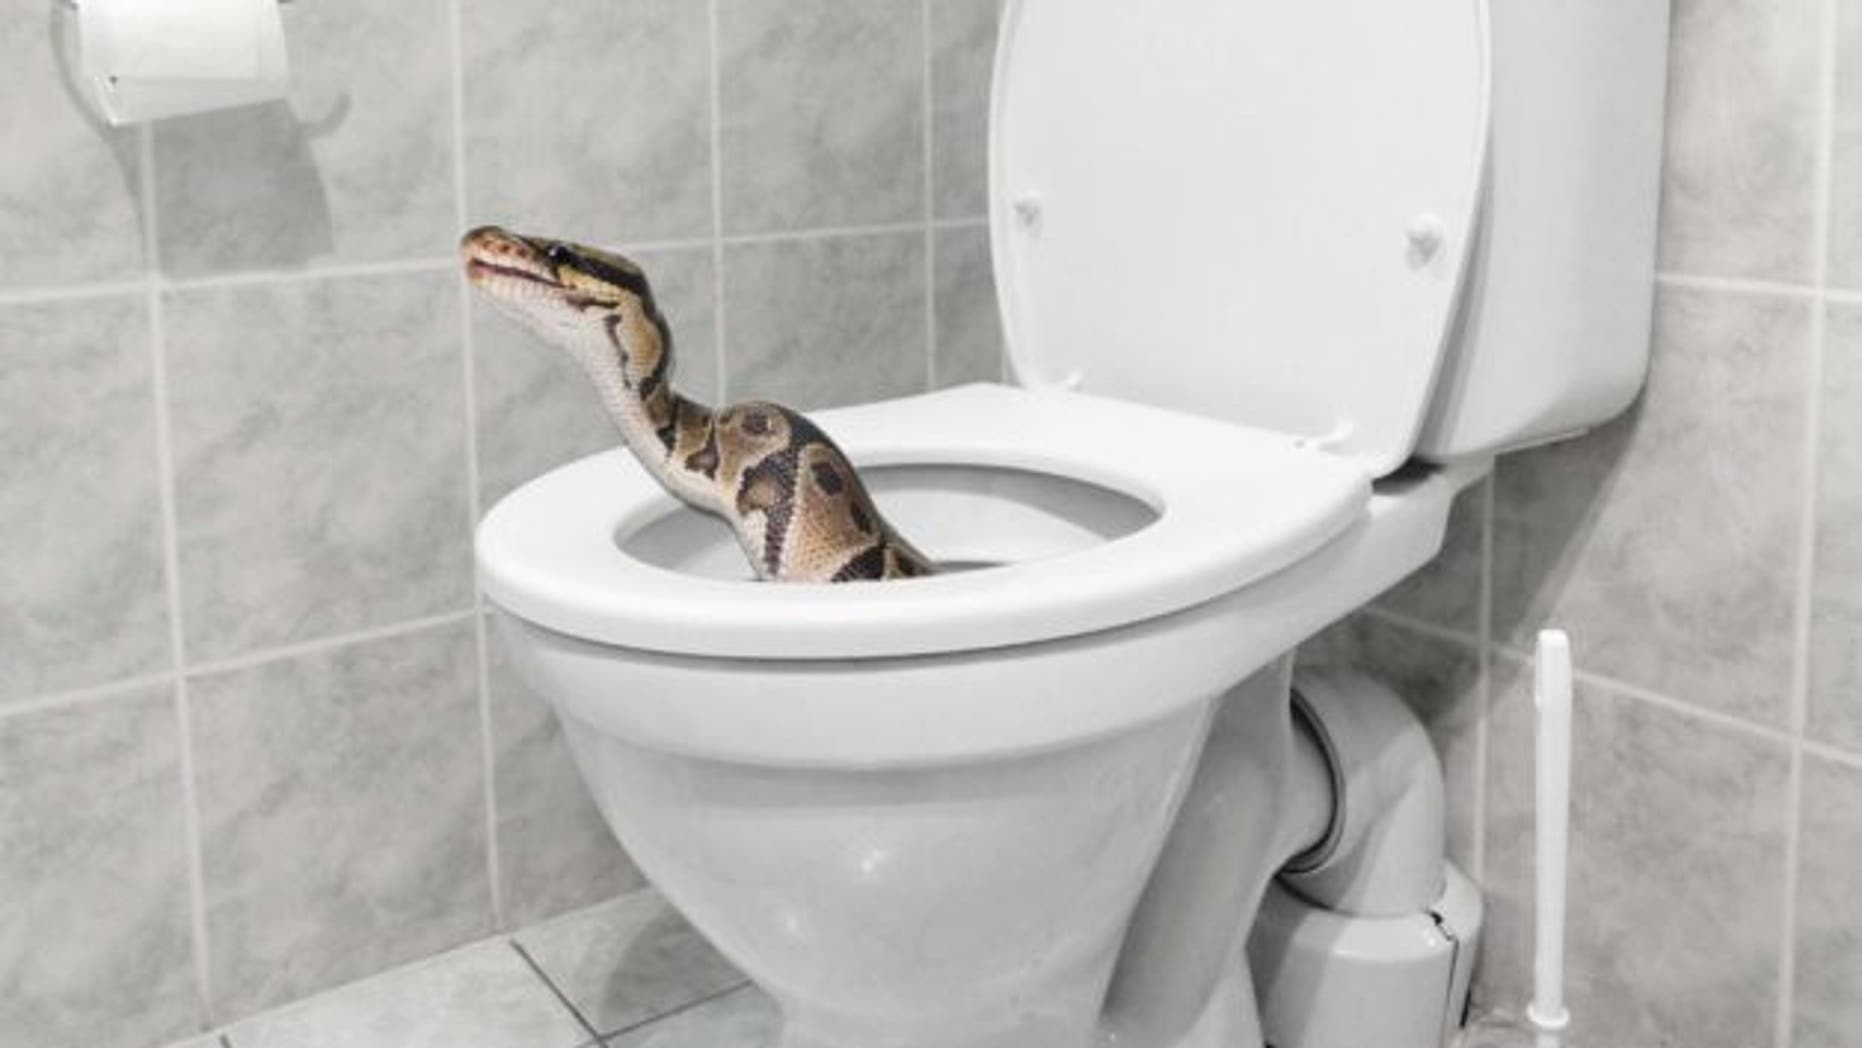 Huge python in toilet gives Australian family a 